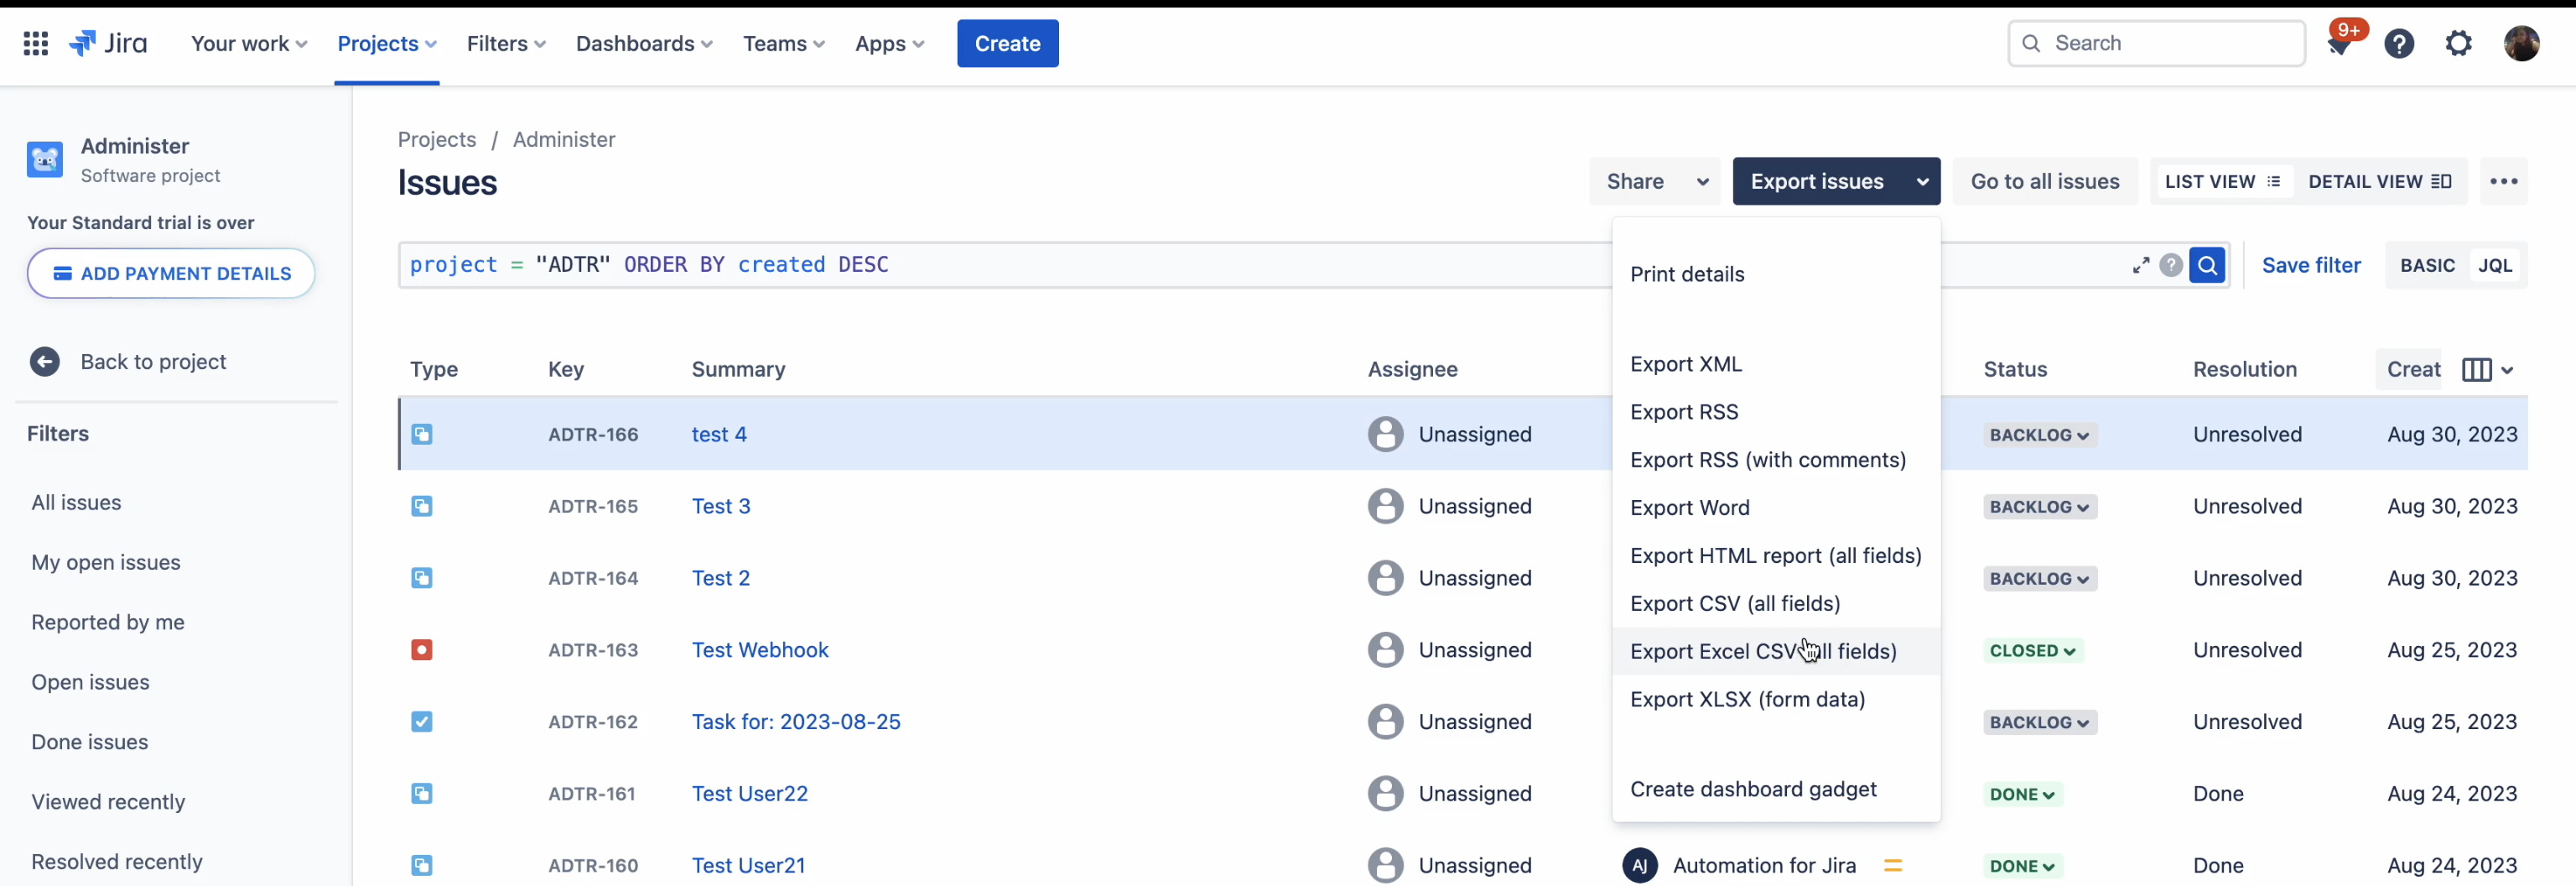 Export issues from jira is CSV